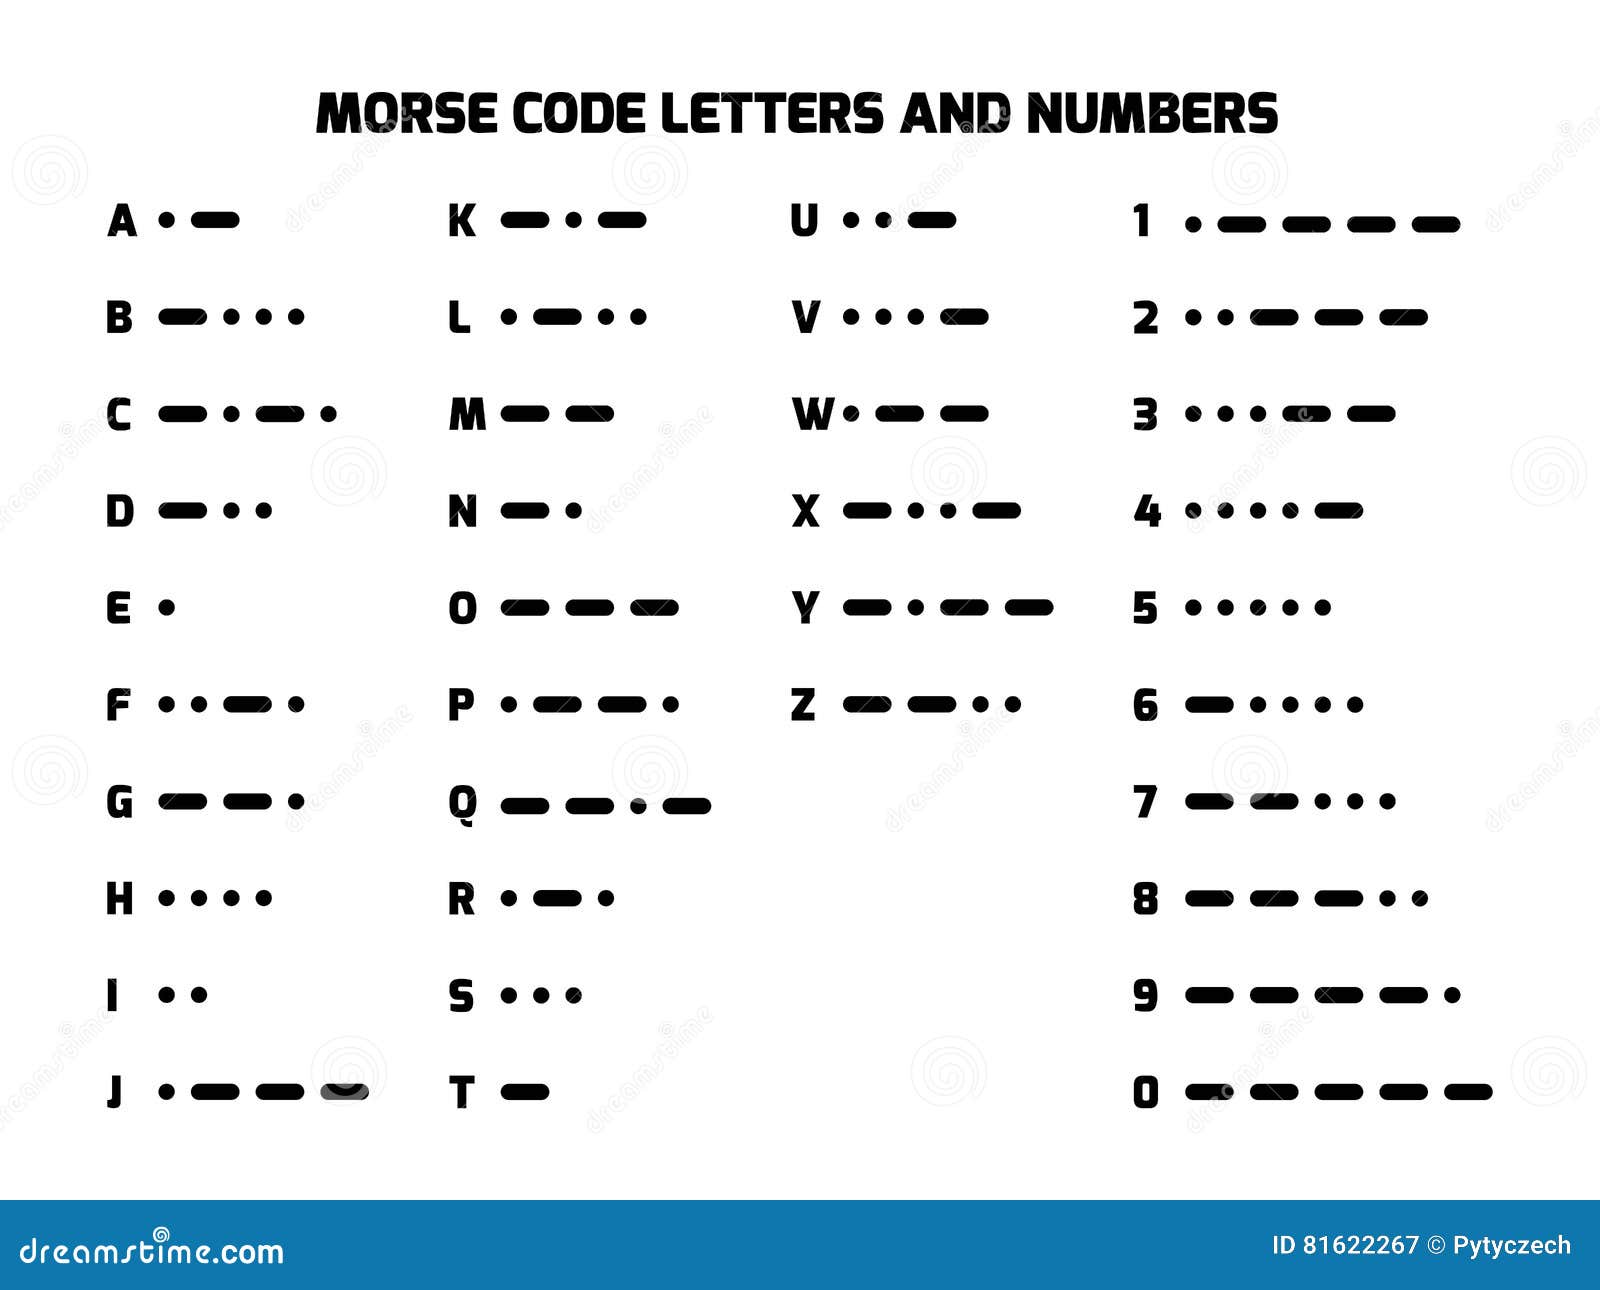 Alphabet Code Zahlen - No country currently has the country code of 35.